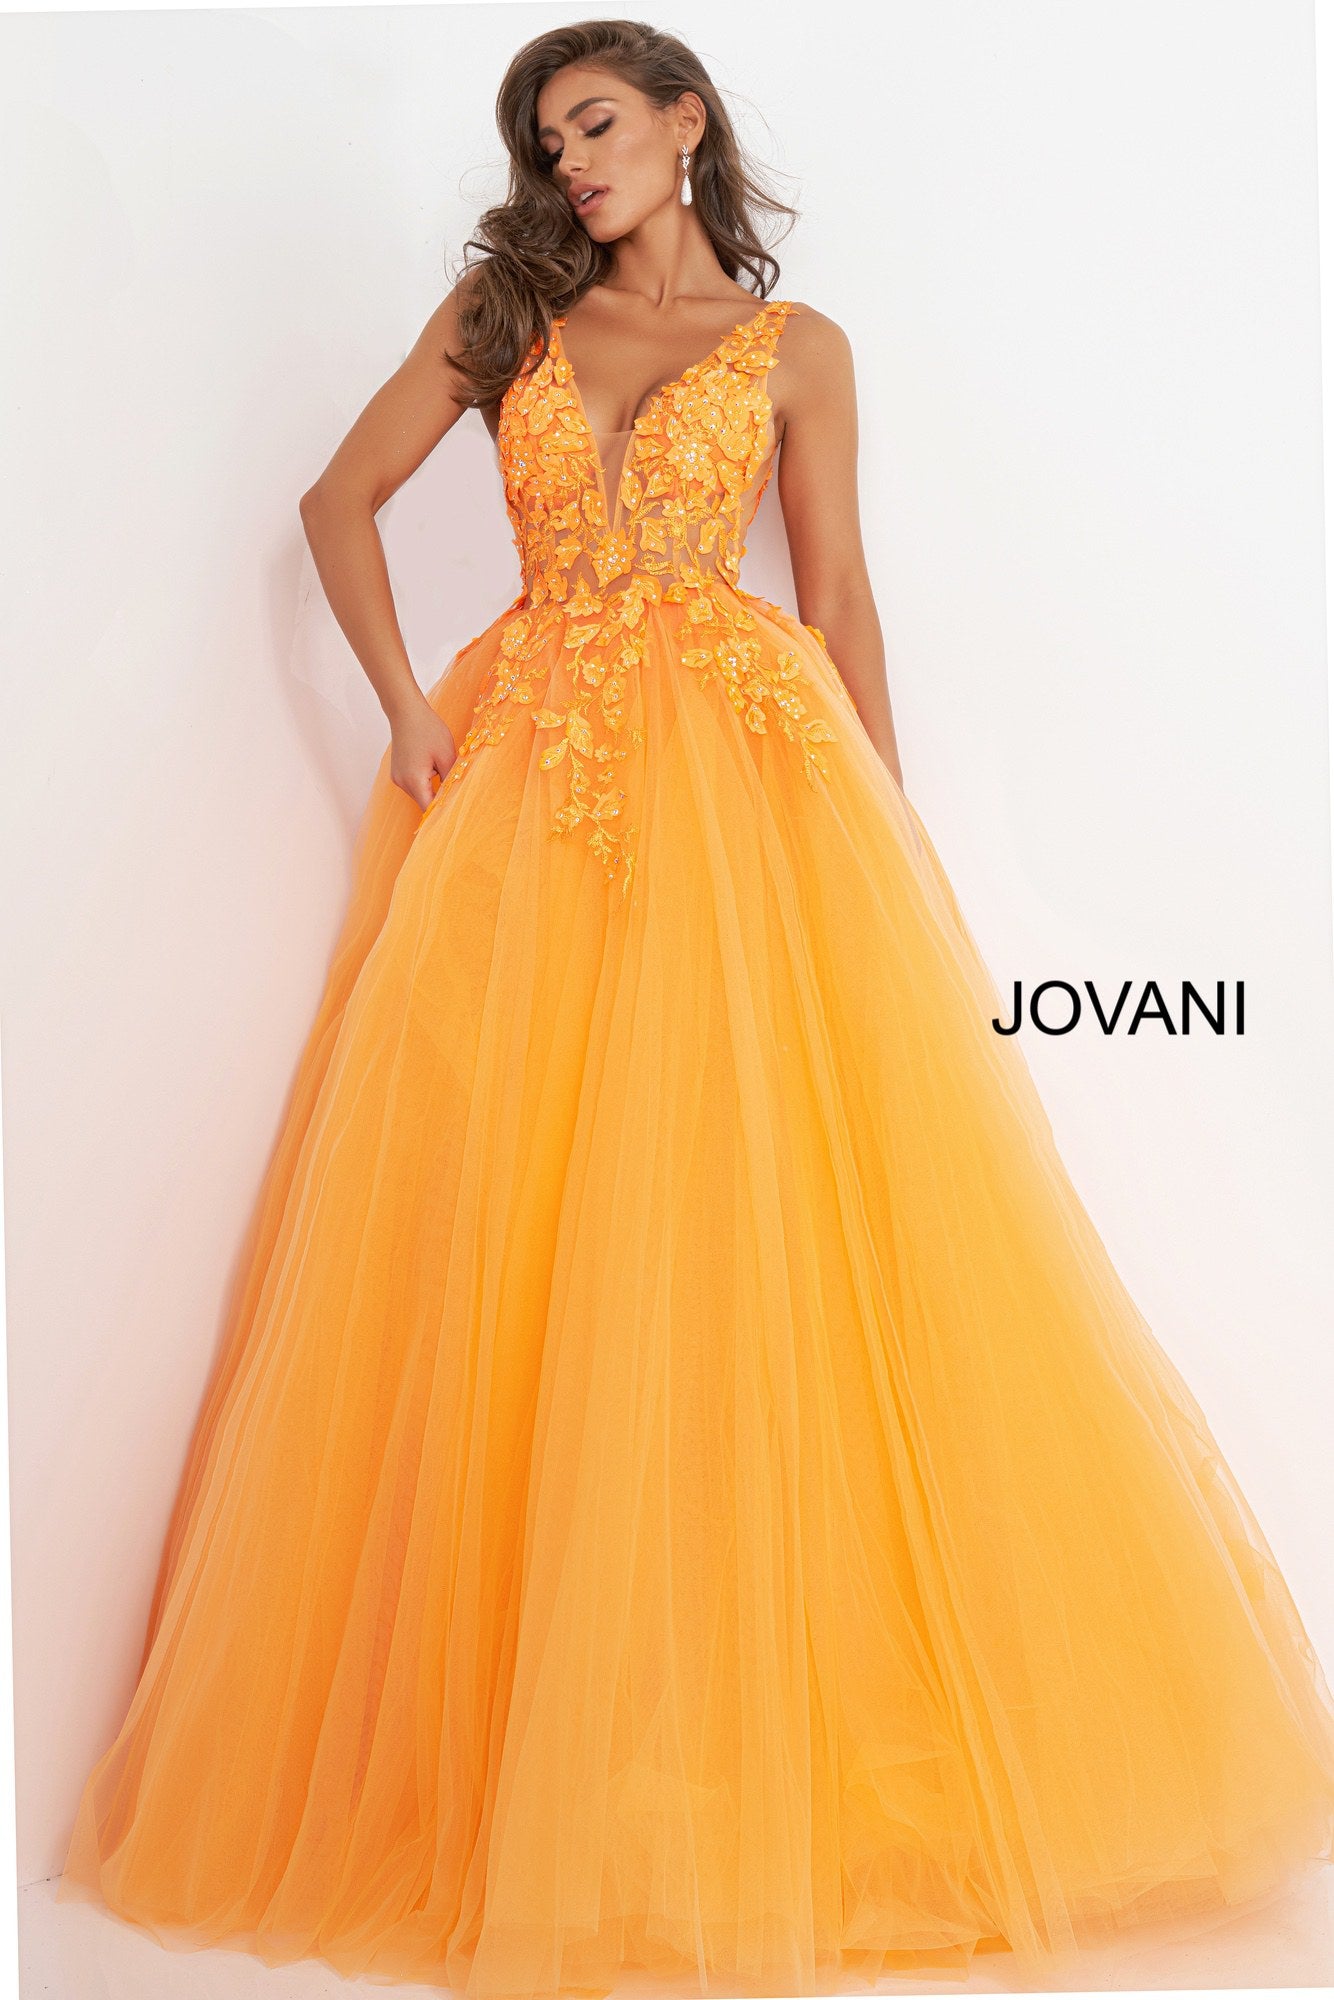 Jovani 02840 is a Gorgeous Lush A Line Tulle Ballgown Prom Dress. This Formal Evening Gown features a sheer v neckline fitted bodice with sheer side panels & mesh inserts. Open V Back. The Bodice is Covered in Embellished 3D Floral Lace Appliques cascading down into the full Ball Gown skirt. Great wedding Dress in Ivory with sweeping train.  Available Sizes: 00,0,2,4,6,8,10,12,14,16,18,20,22,24  Available Colors: black, dark blush, ivory, orange